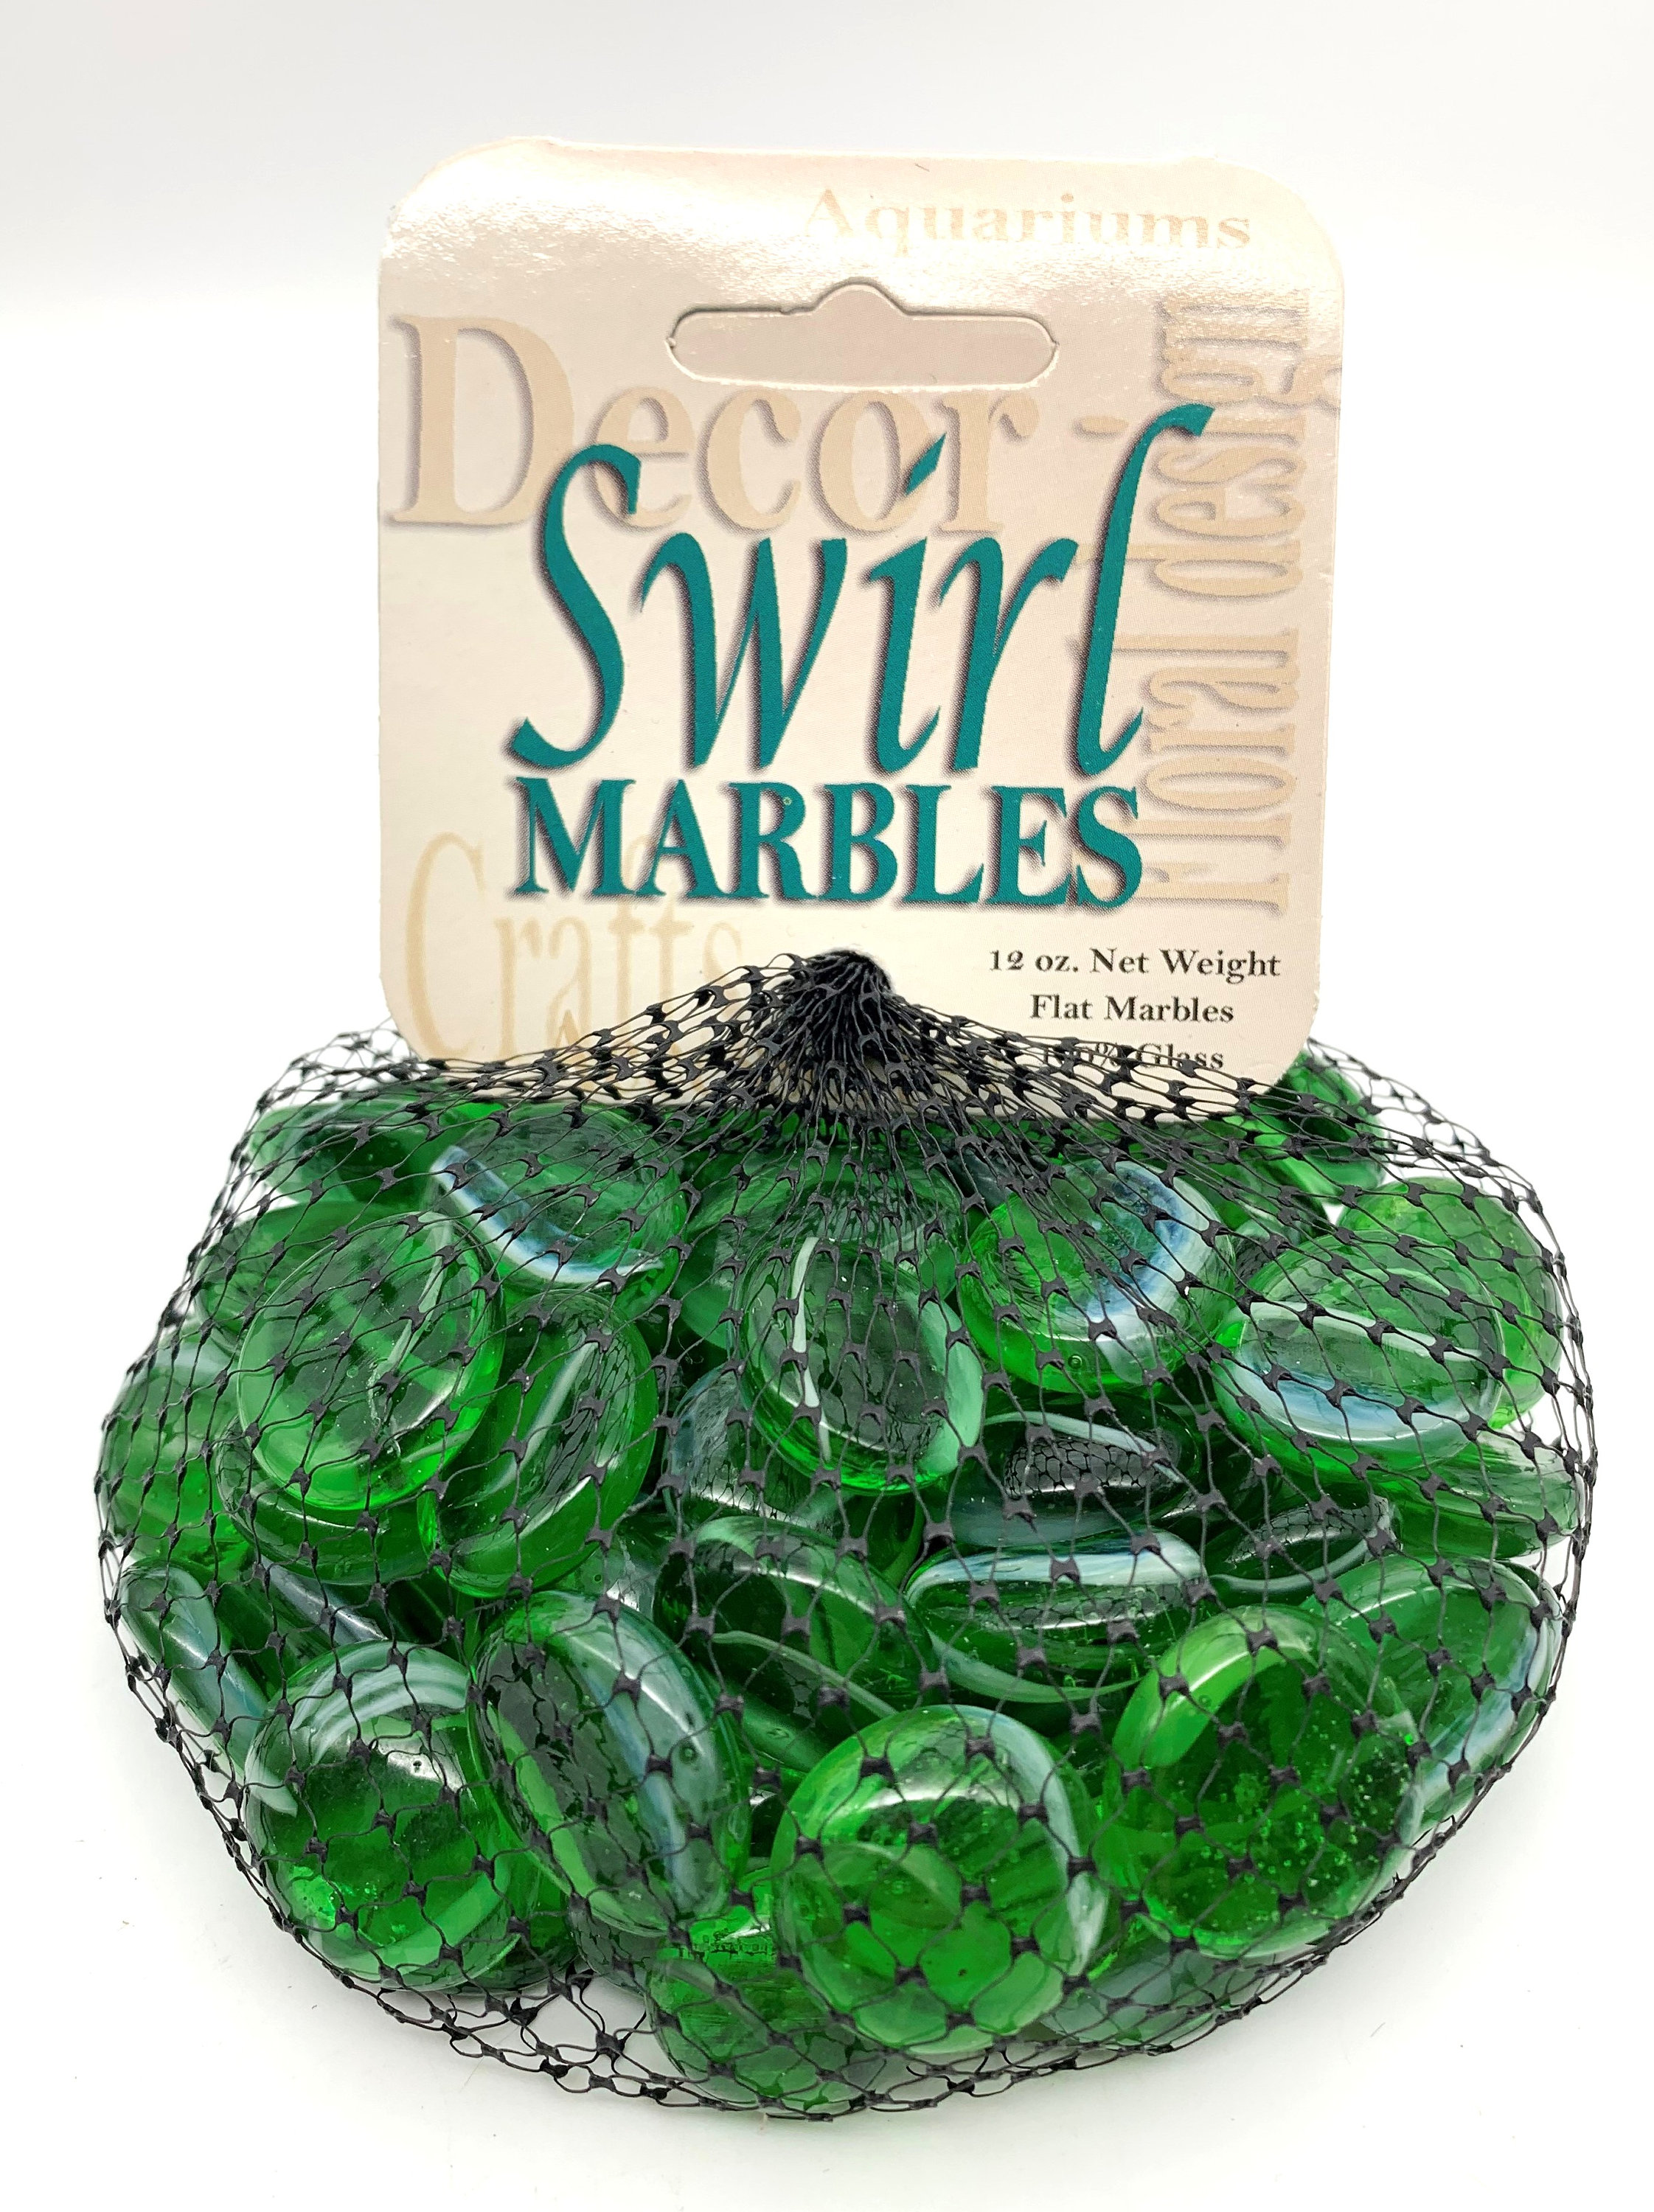 MARBLE DISPLAY RINGS STANDS BY MEGA MARBLES 12 PACK WILL HOLD FROM 3/4" TO 2" 